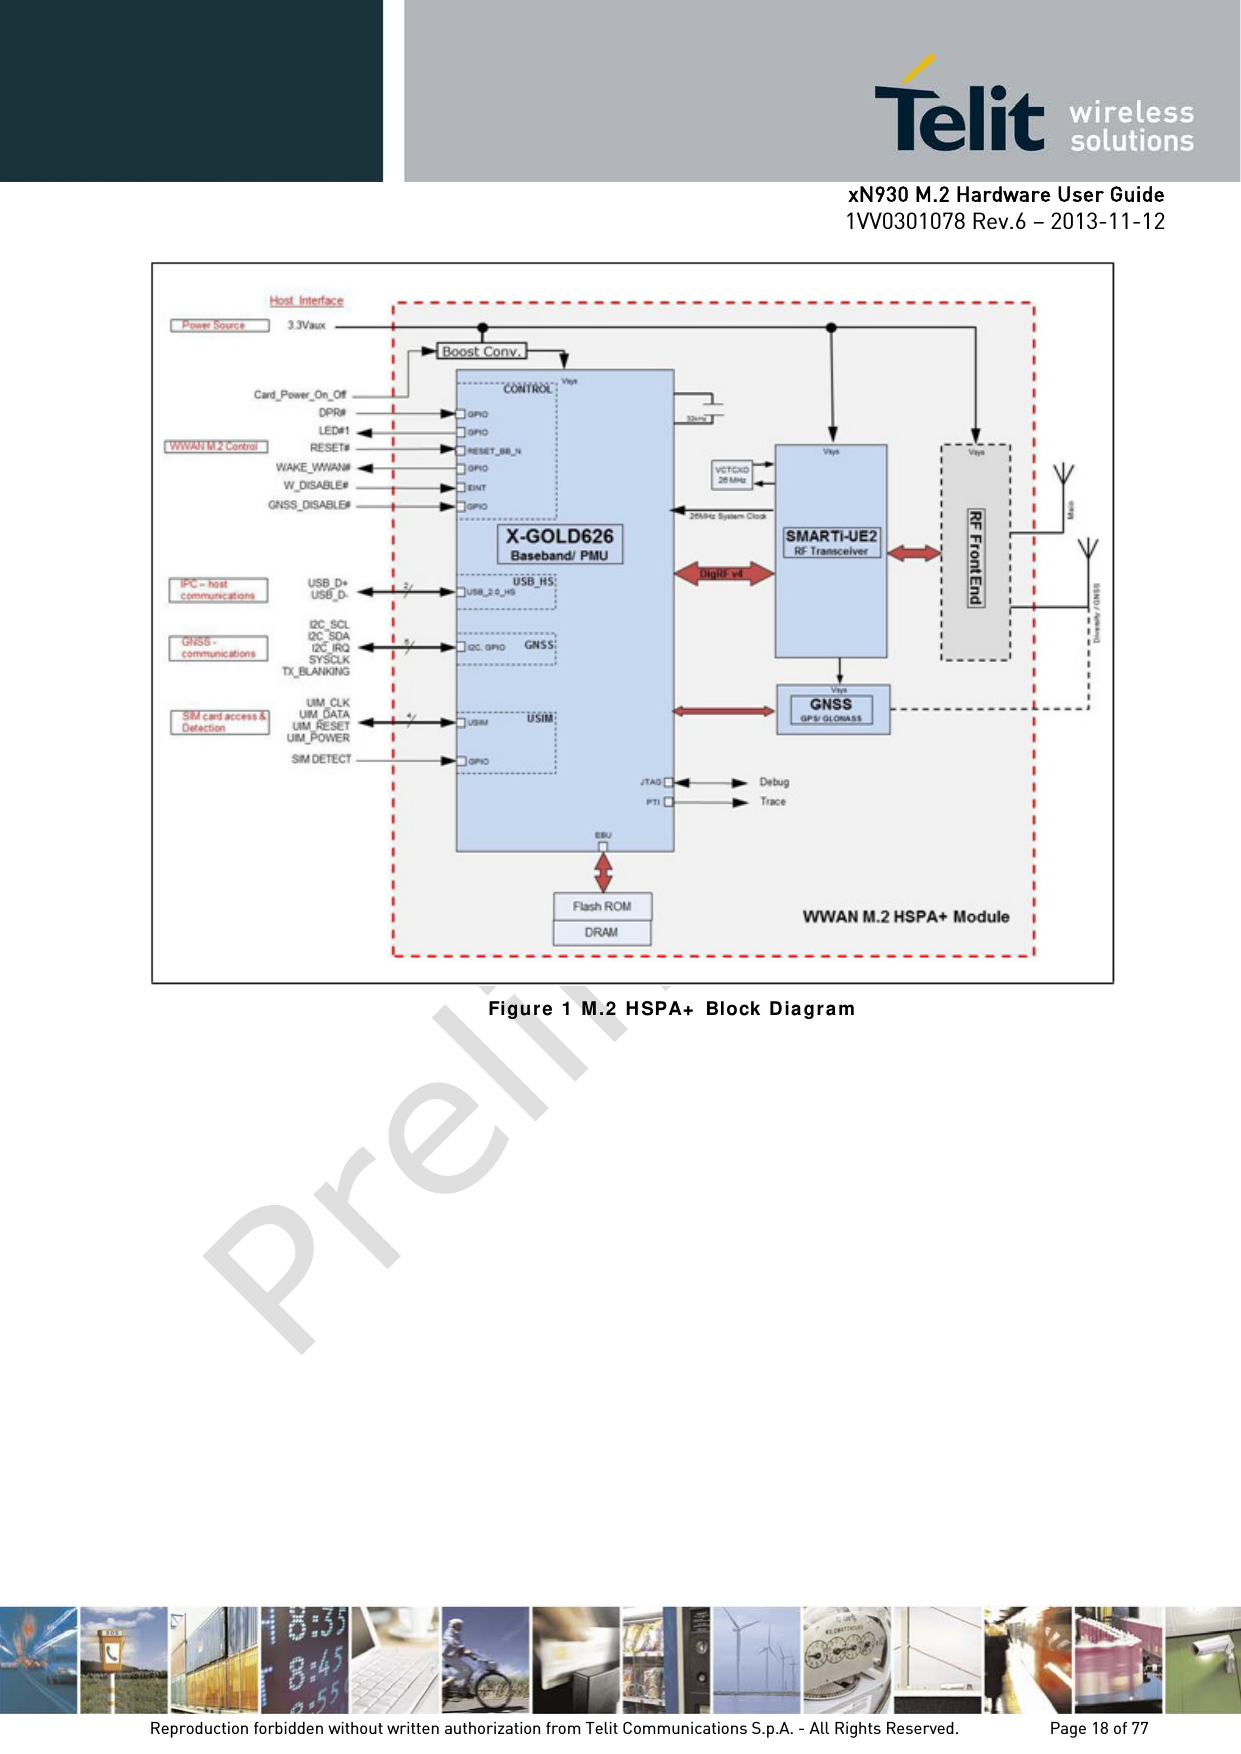      xN930 M.2 Hardware User Guide 1VV0301078 Rev.6 – 2013-11-12     Figur e 1  M .2  HSPA+  Block  Dia gra m       Reproduction forbidden without written authorization from Telit Communications S.p.A. - All Rights Reserved.    Page 18 of 77 